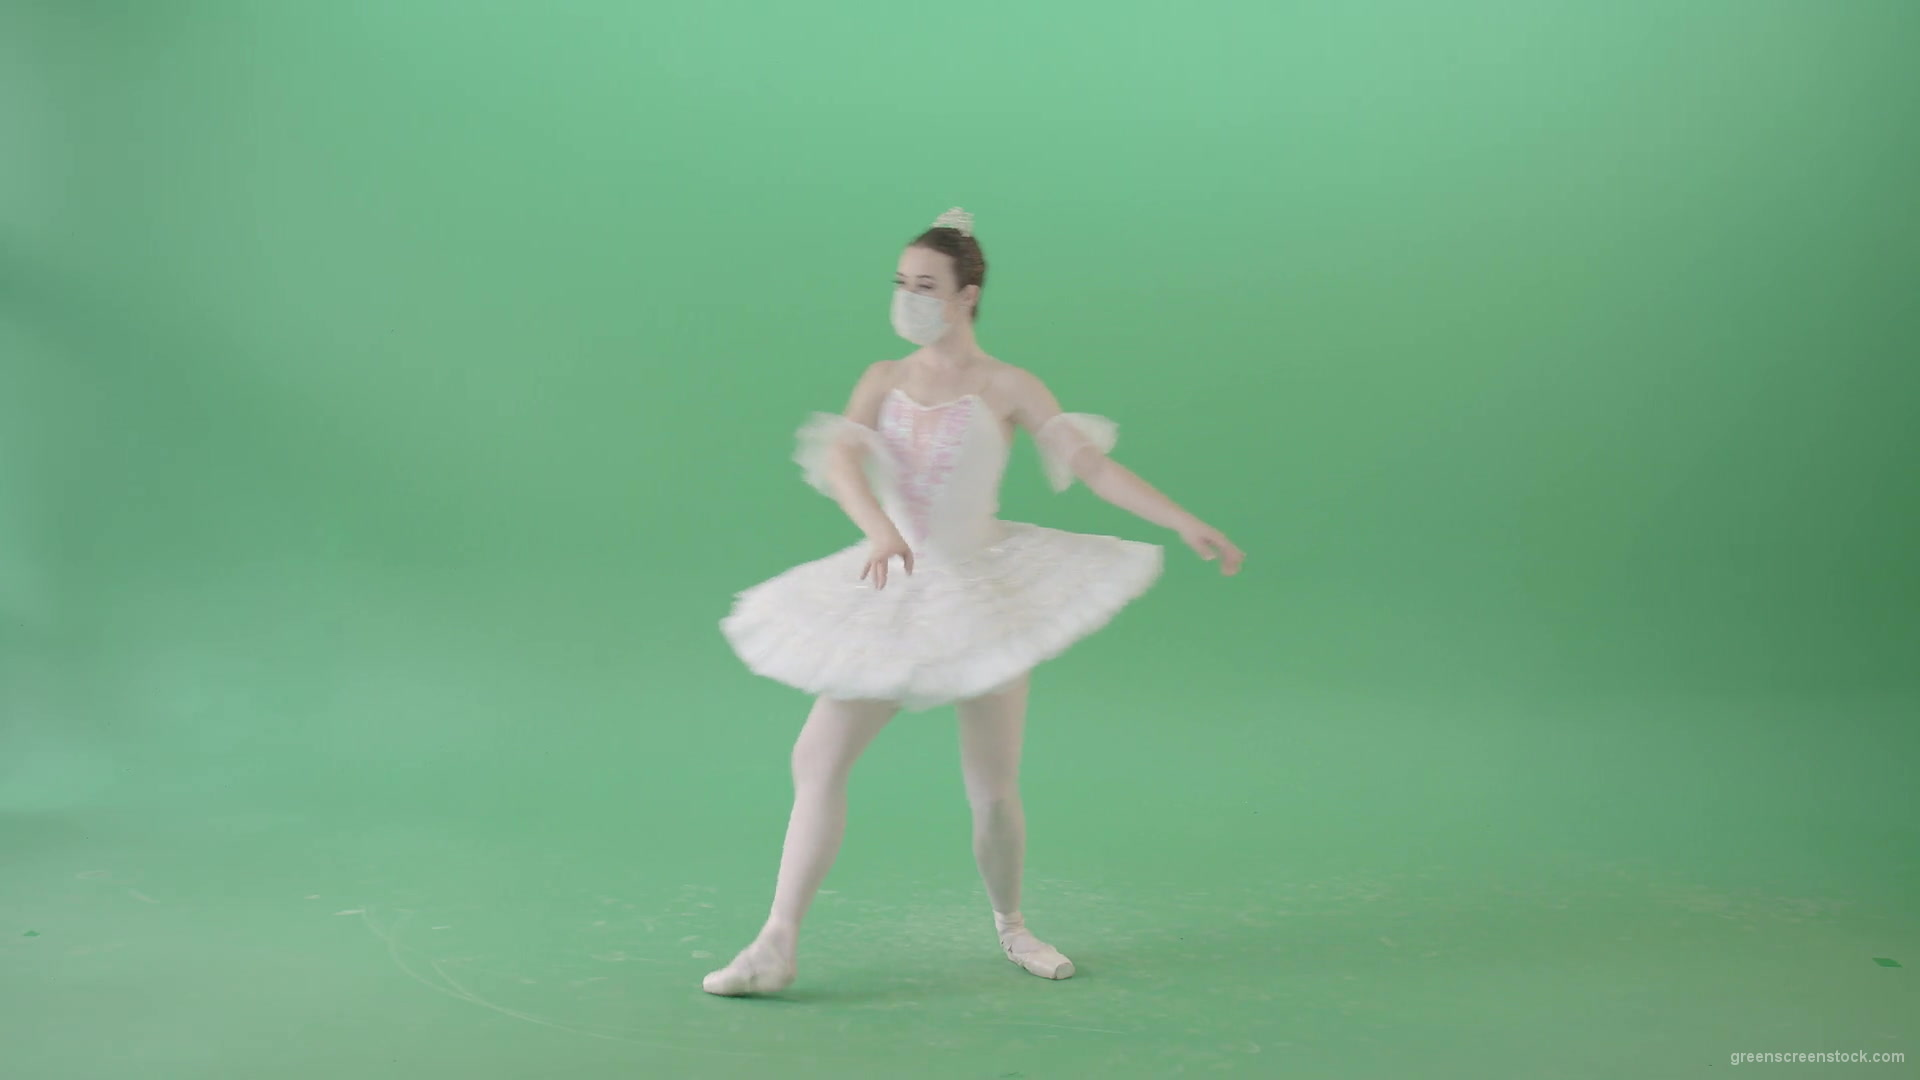 Amazing-Flowing-dance-by-Ballerina-ballet-girl-looking-for-Corona-Virus-isolated-on-Green-Screen-Viral-4K-Video-Footage-1920_002 Green Screen Stock